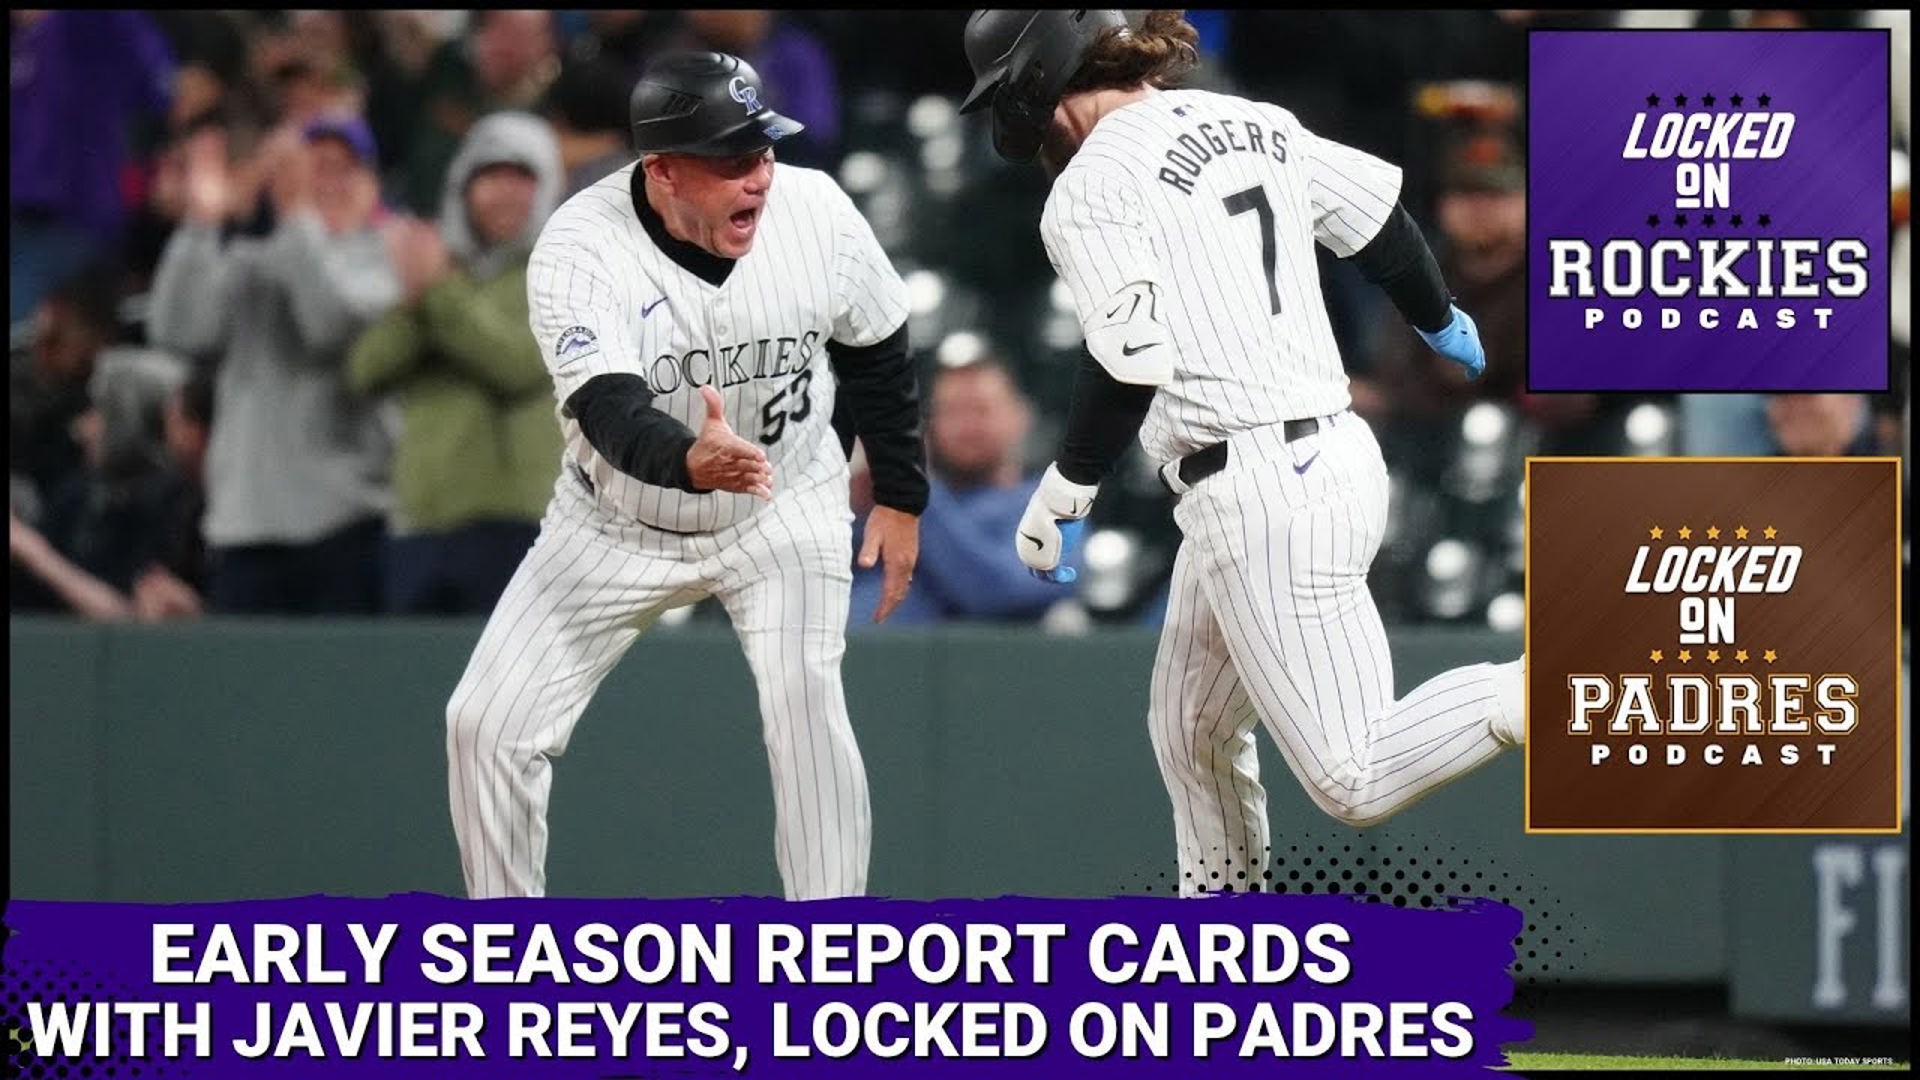 We break down the game and look ahead to the rest of the series and early NL West storylines with the host of Locked On Padres, Javier Reyes!